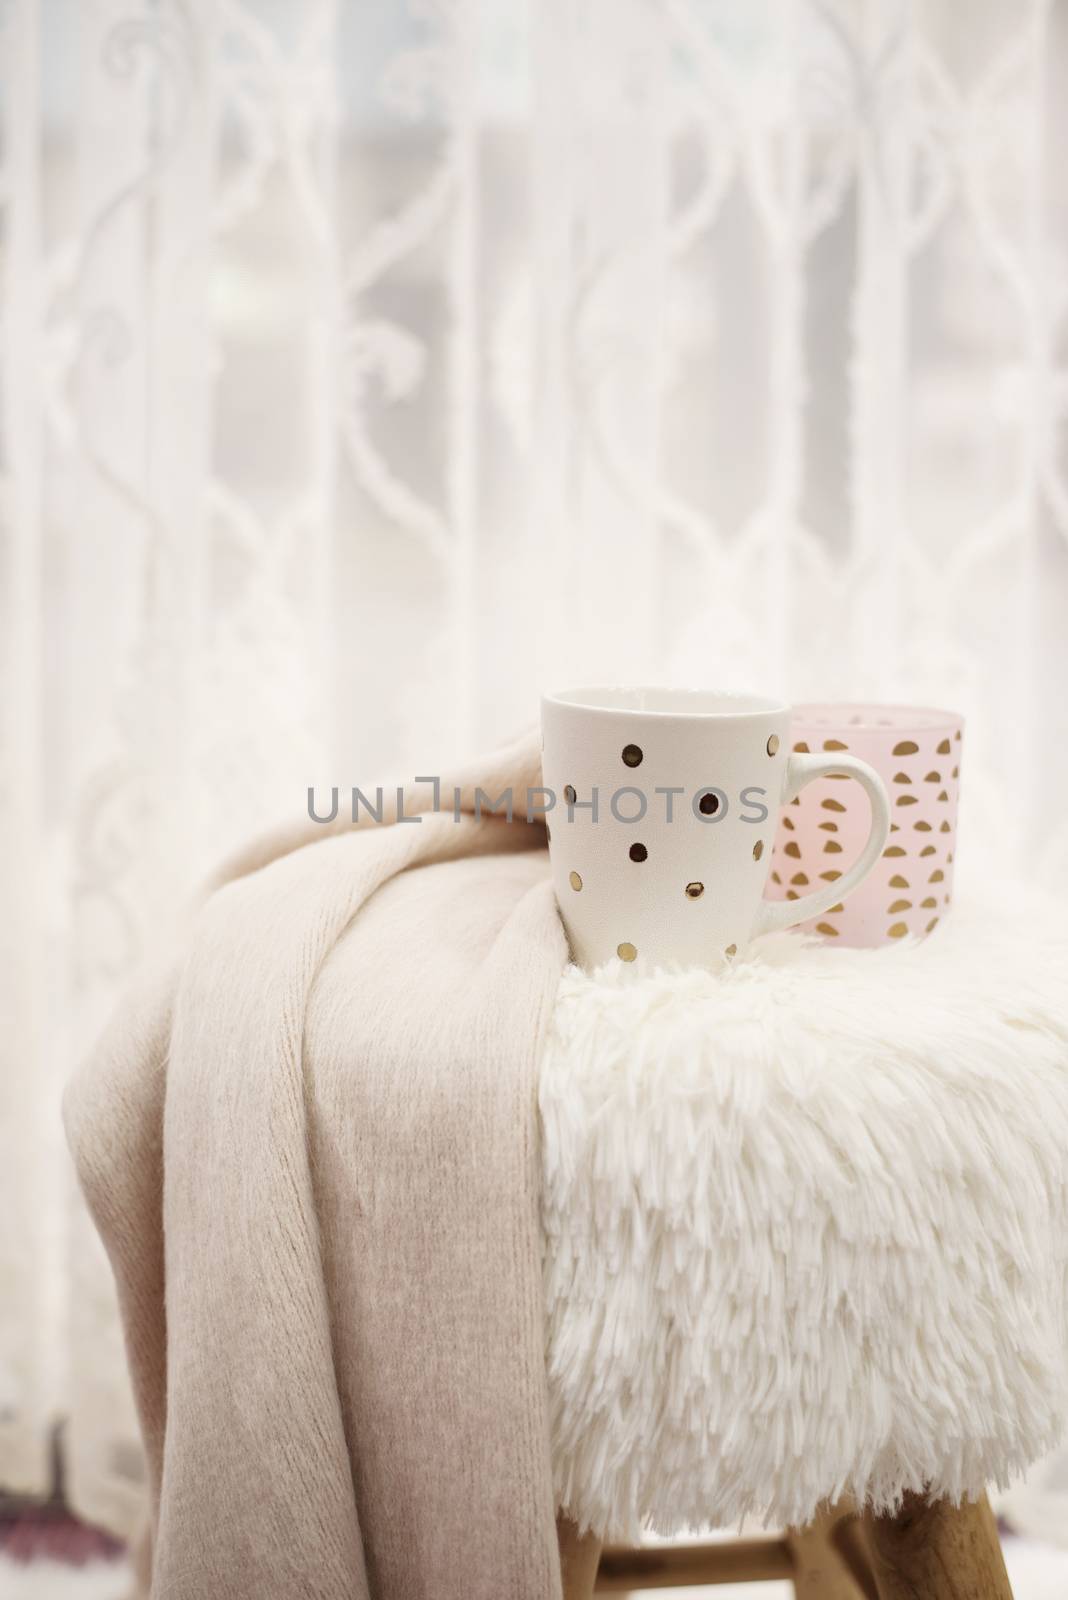 Hot chocolate, a cup of cappuccino on a fur chair in front of a large window with a white sheers curtain. Warm scarf and lights around. Cozy winter evenings